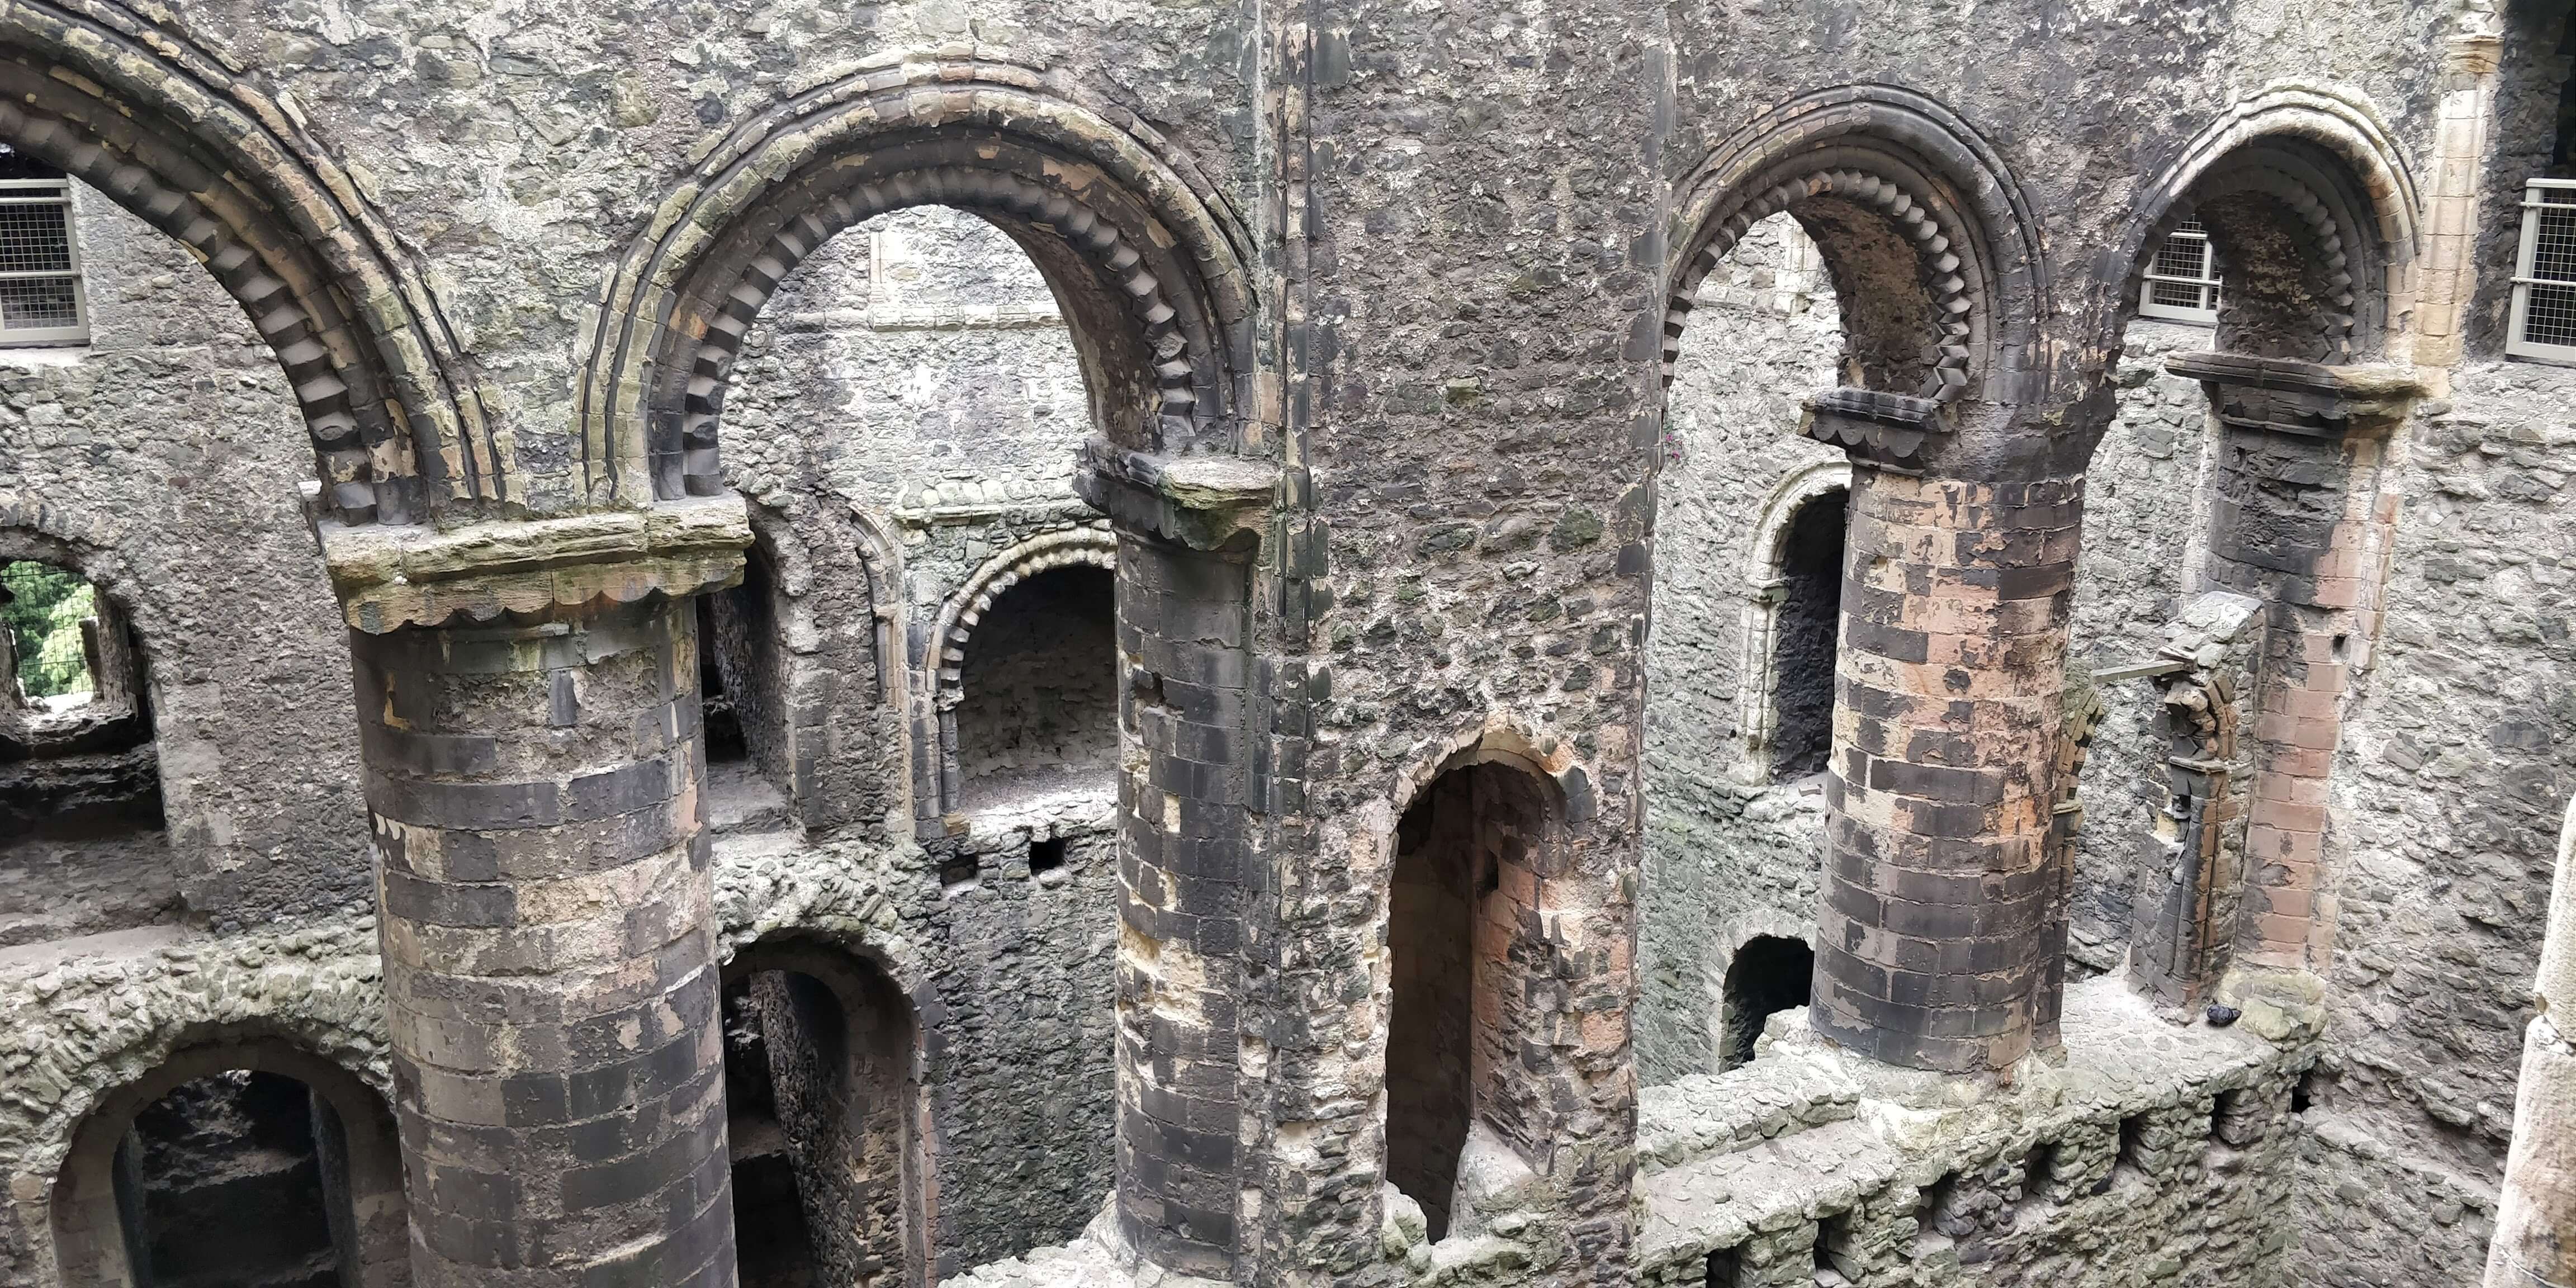 The crosswall of the keep, with four archways and the well shaft in the middle. Through the archways you can see the windows and doorways of the other half of the keep.